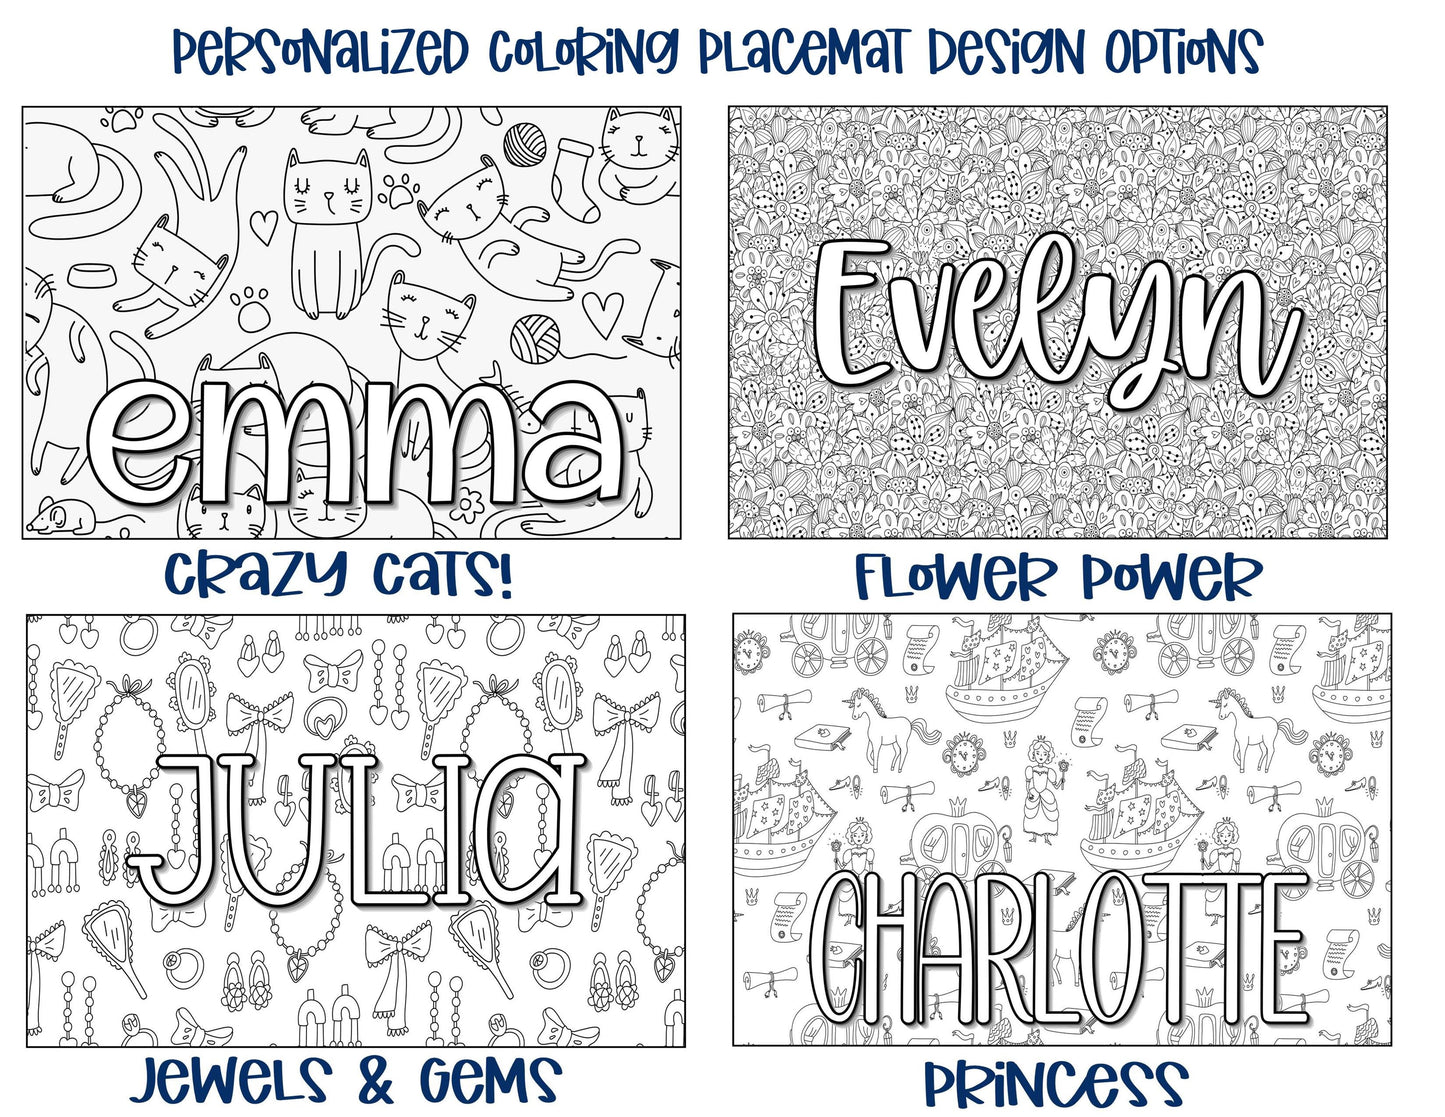 Personalized Coloring Name Placemat - On the Road